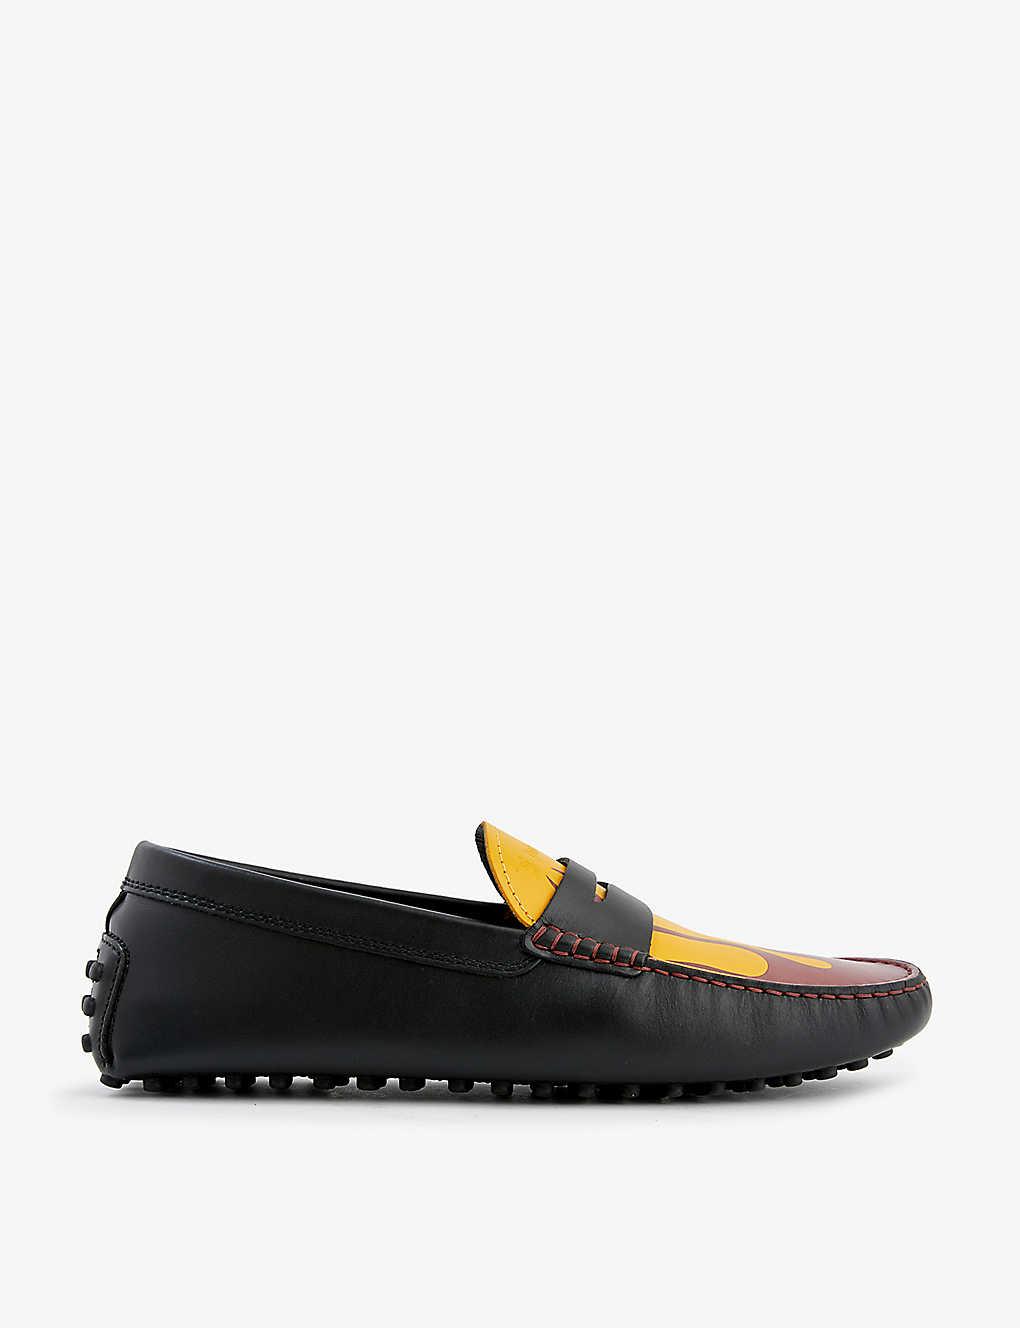 Moncler Genius 8 Palm Angels X Tod's Gommino Leather Loafers in Black ...